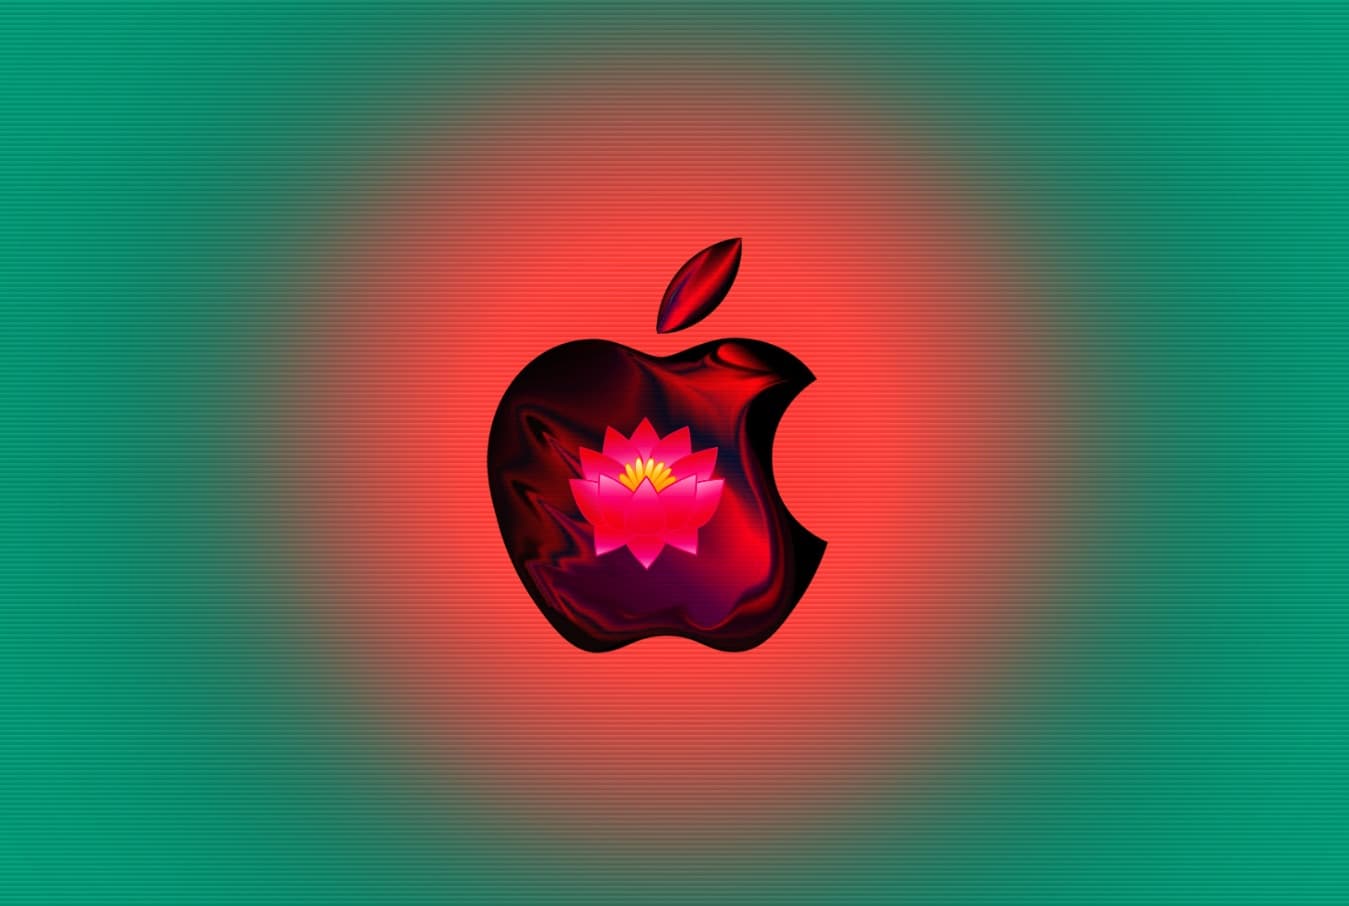 Watch out: OceanLotus hackers hit macOS users with new malware